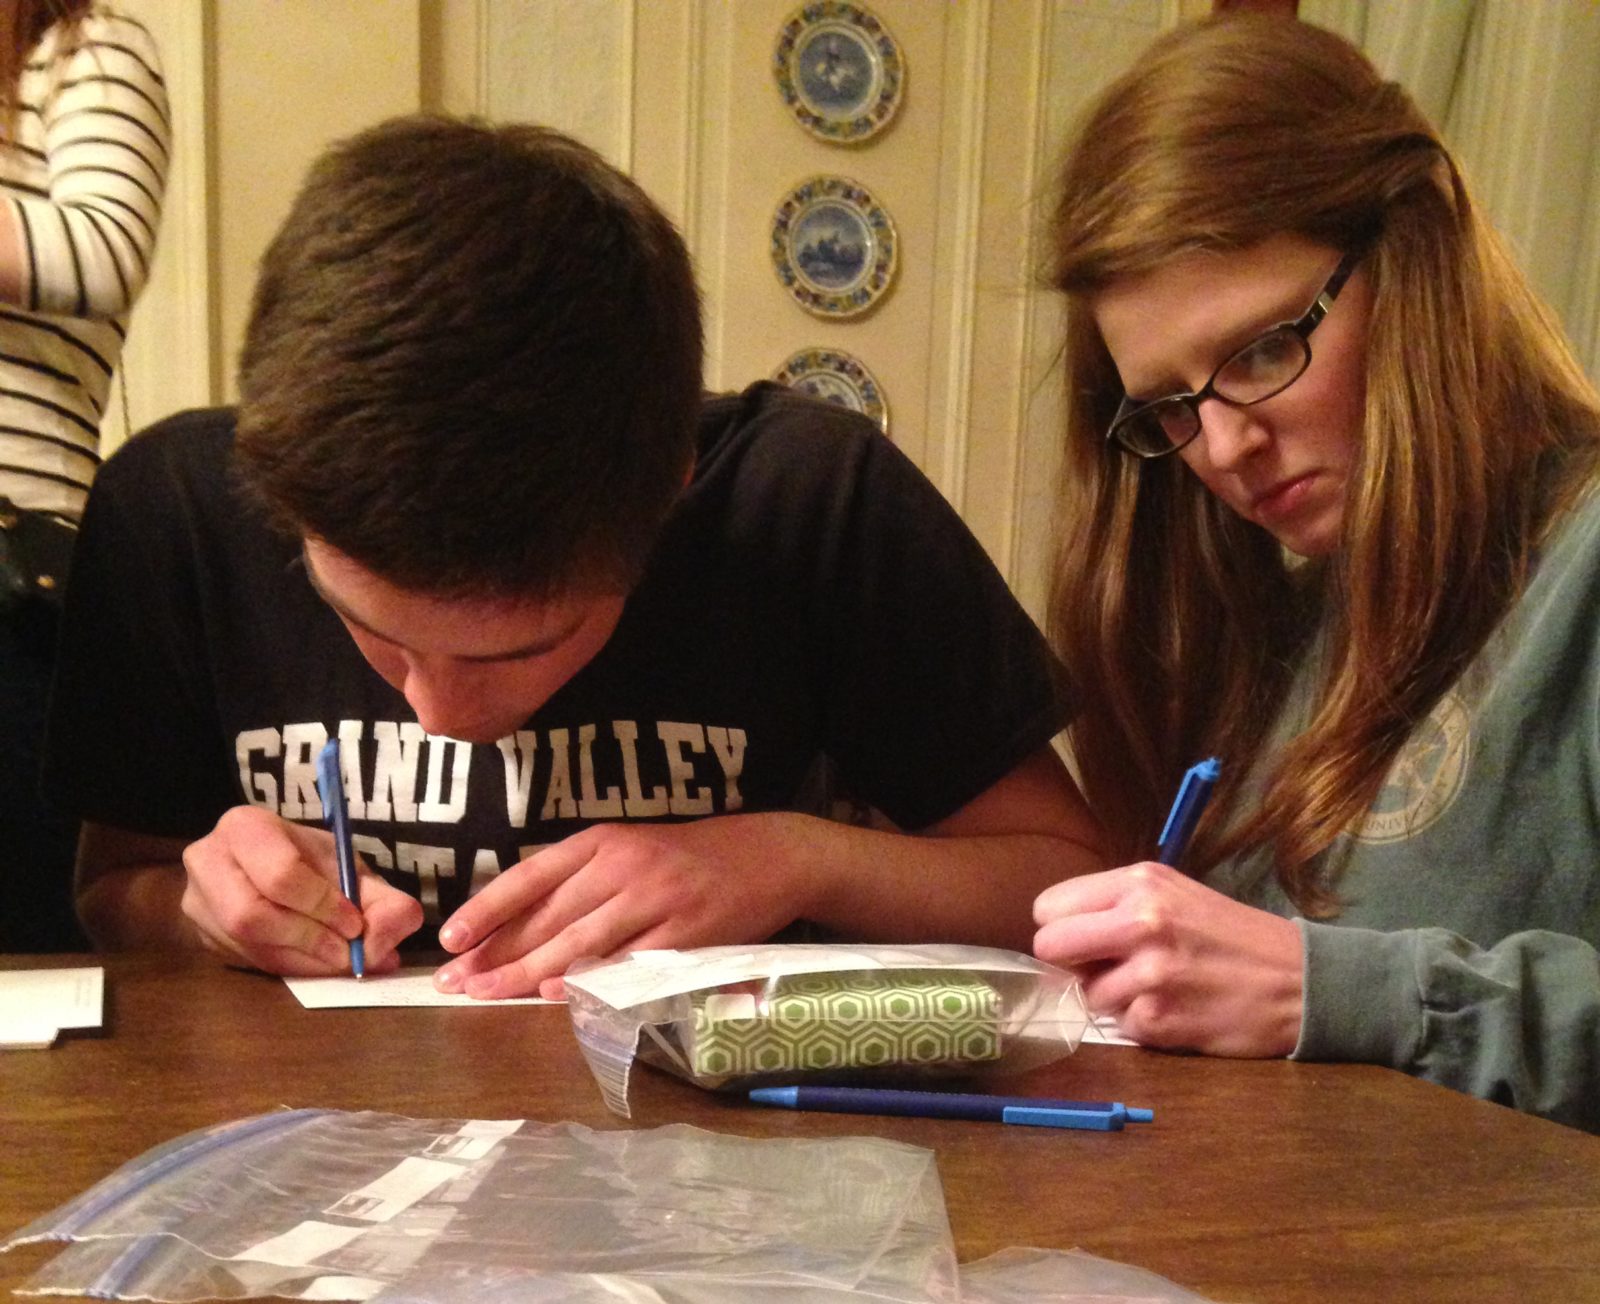 Matt Bogden (CSS 14) and Claire Johnson (CSS 14) write notes to American service members to include with the toiletry bags.